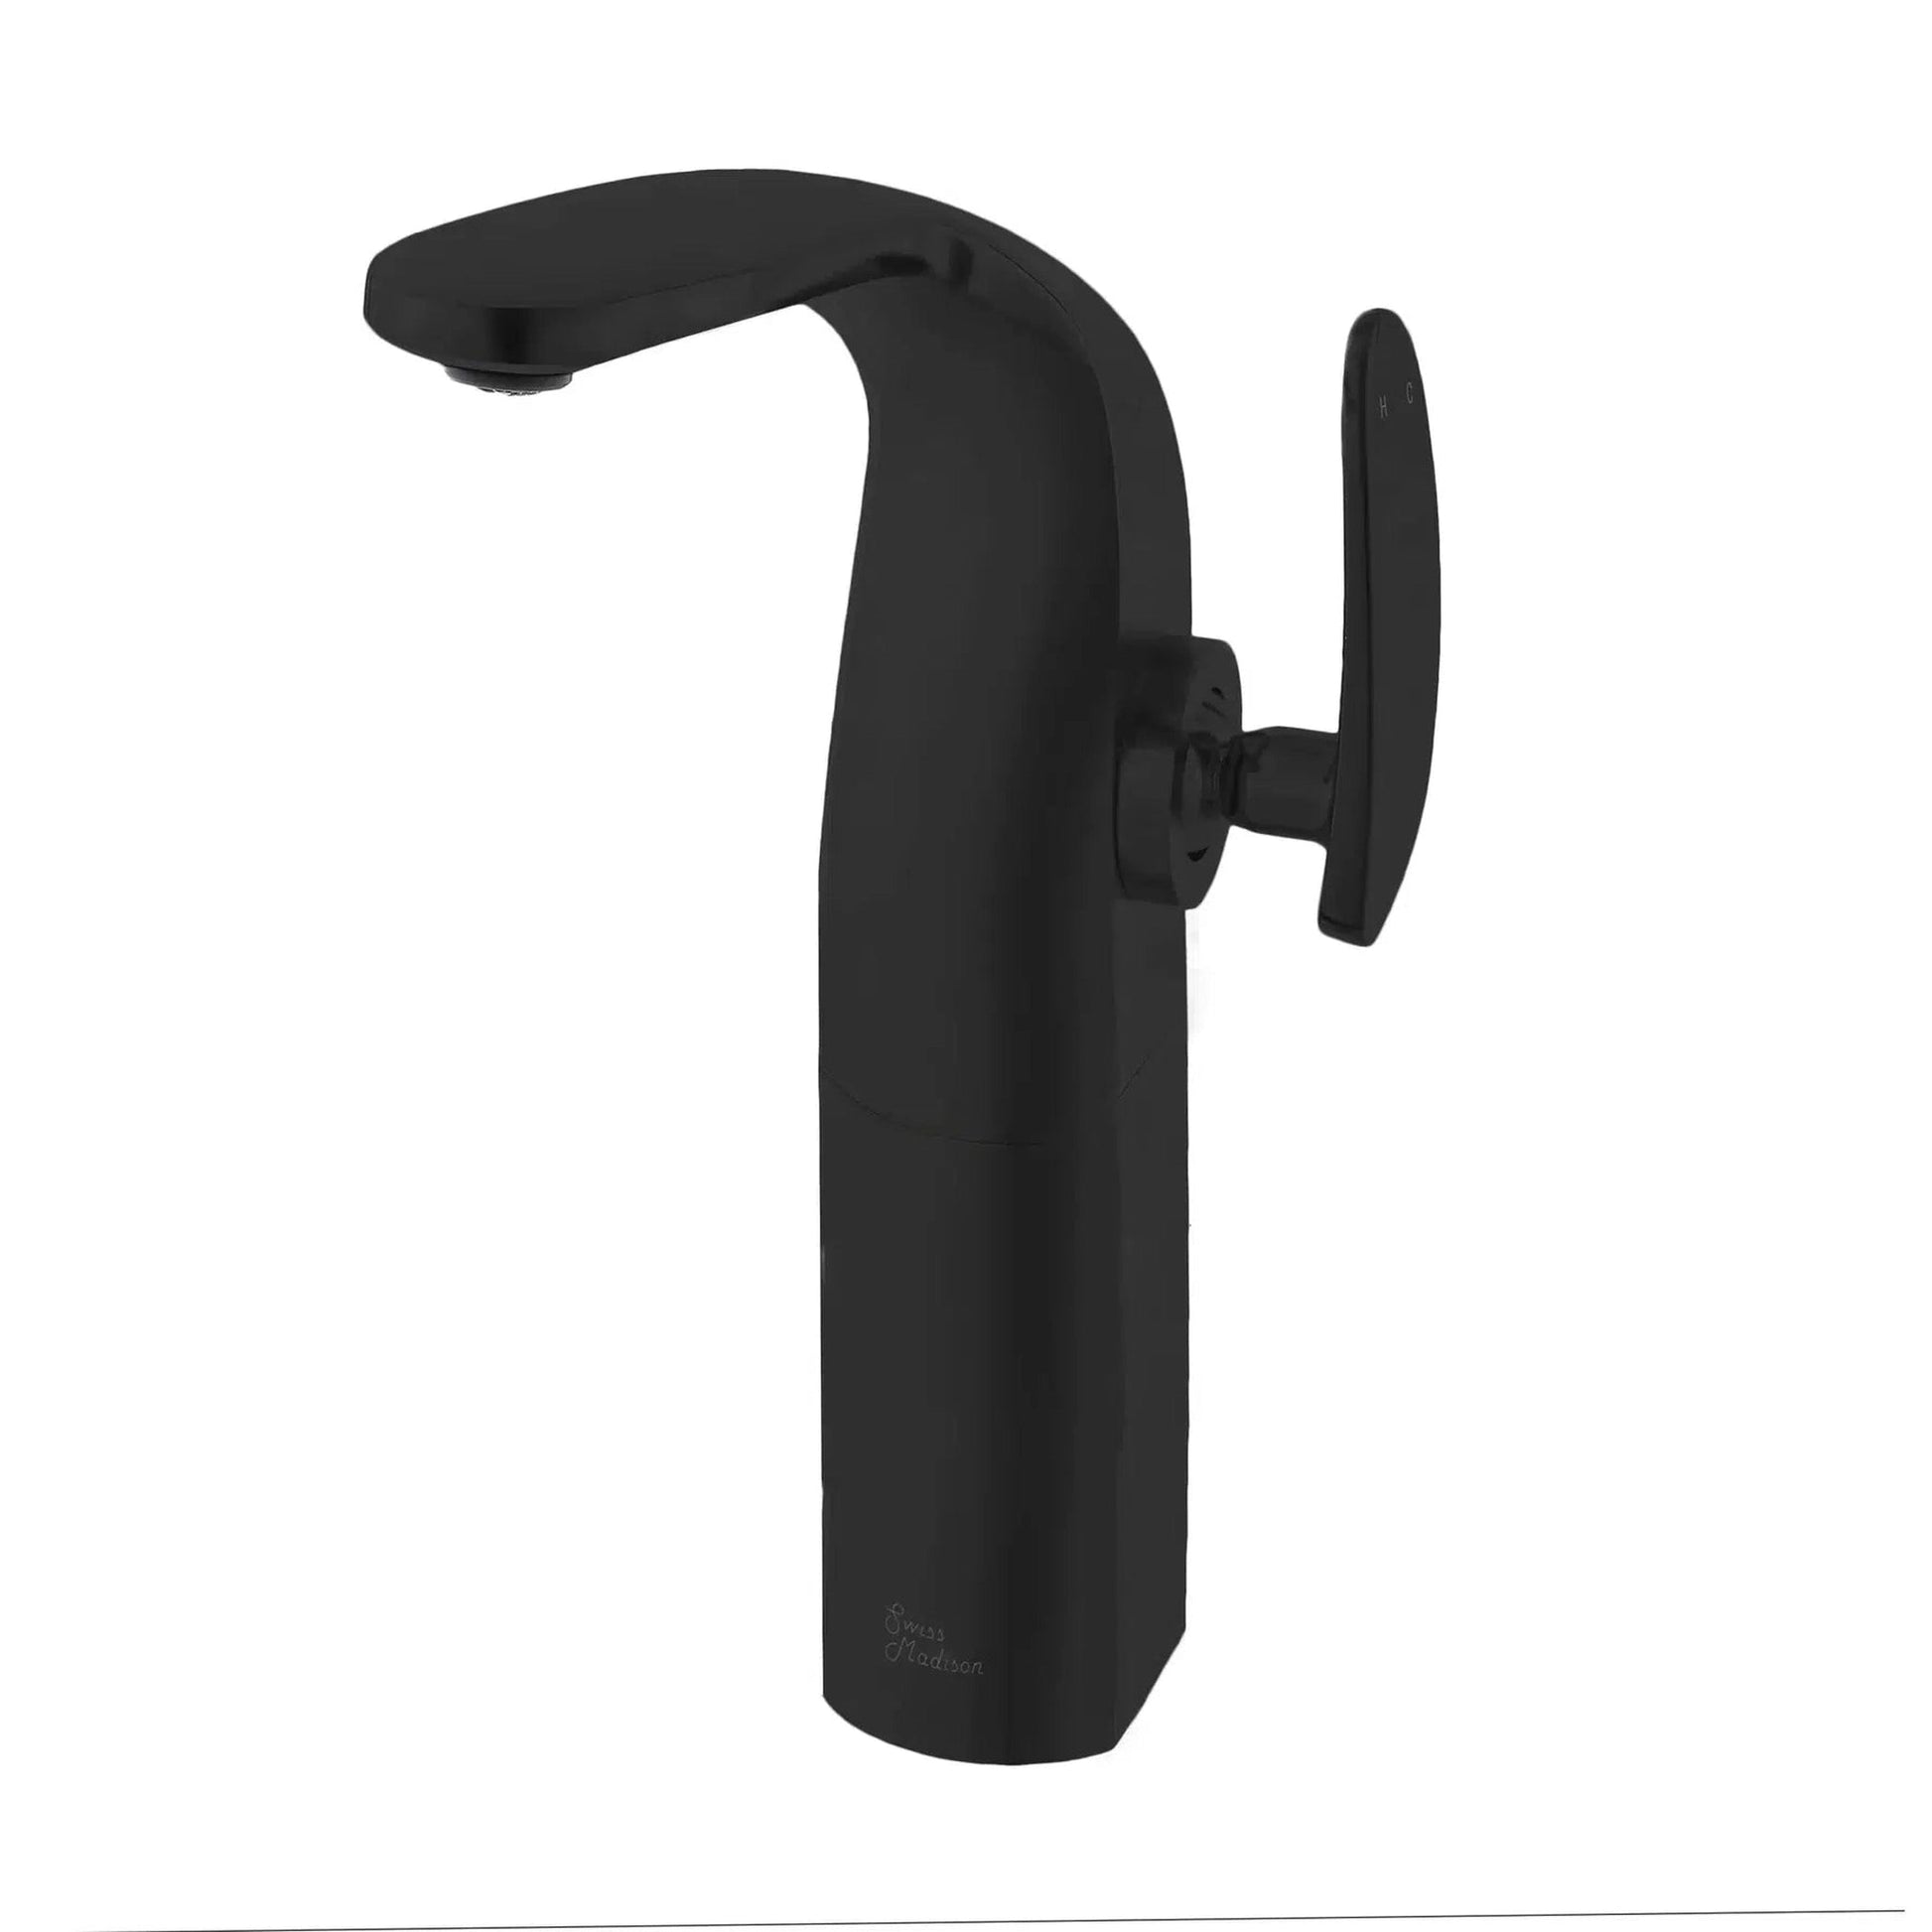 Swiss Madison Château 12" Matte Black Single Hole Bathroom Faucet With Flow Rate of 1.2 GPM